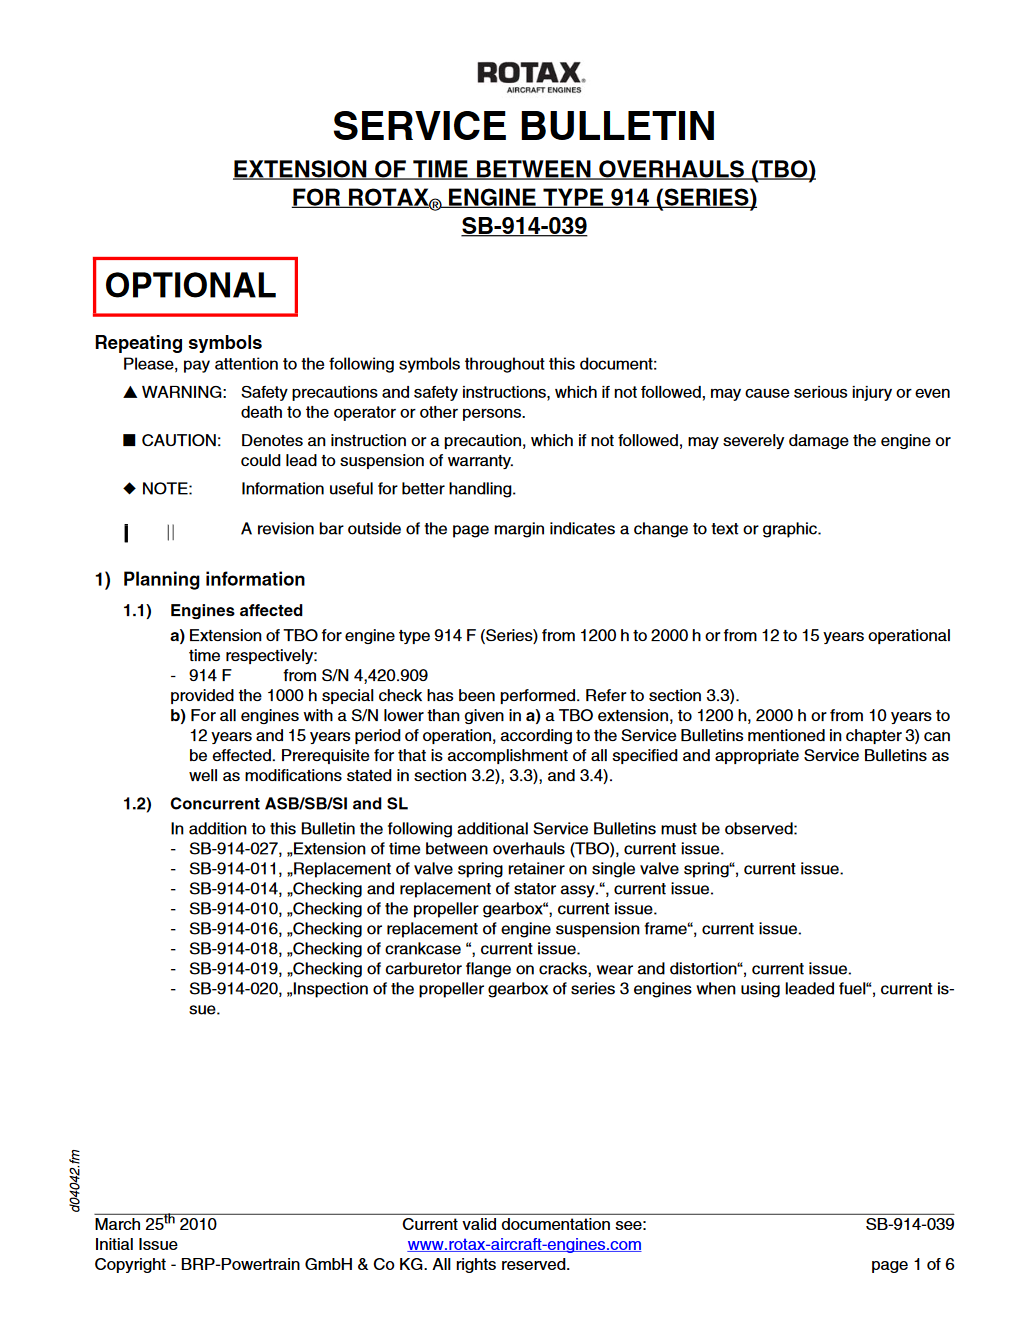 Rotax Service Bulletin TBO Extension